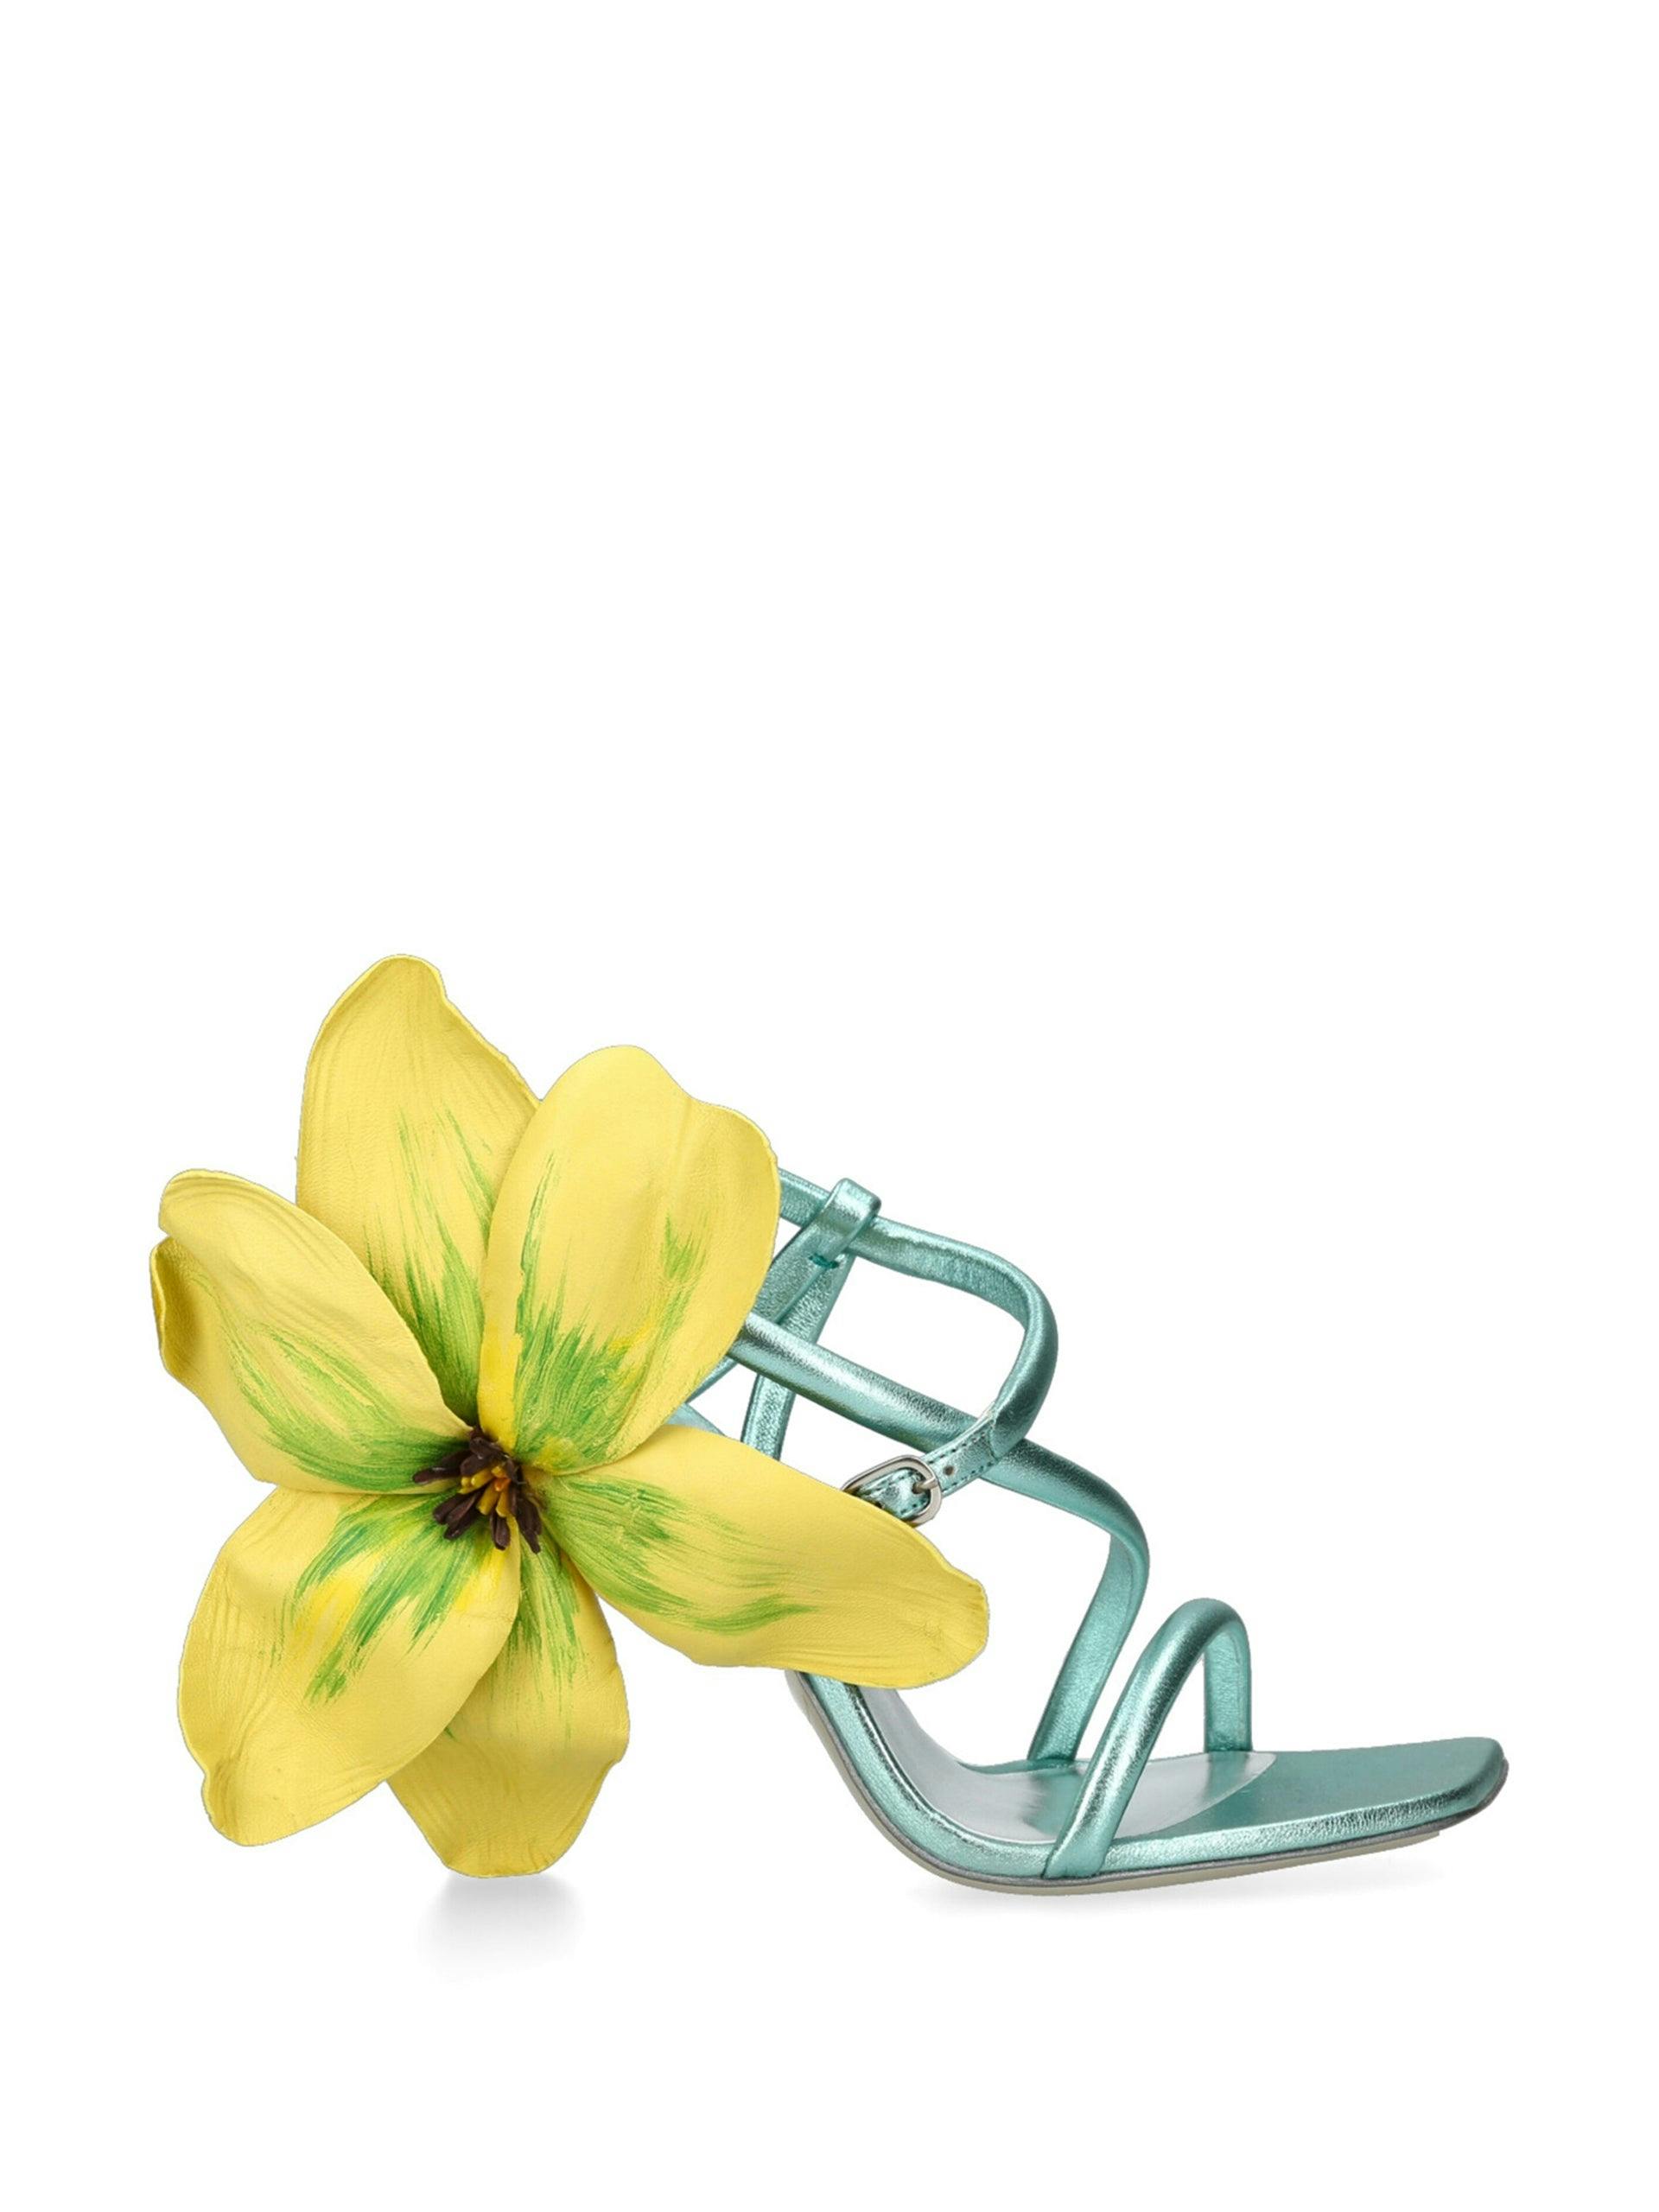 Metallic sandals with floral embellishment